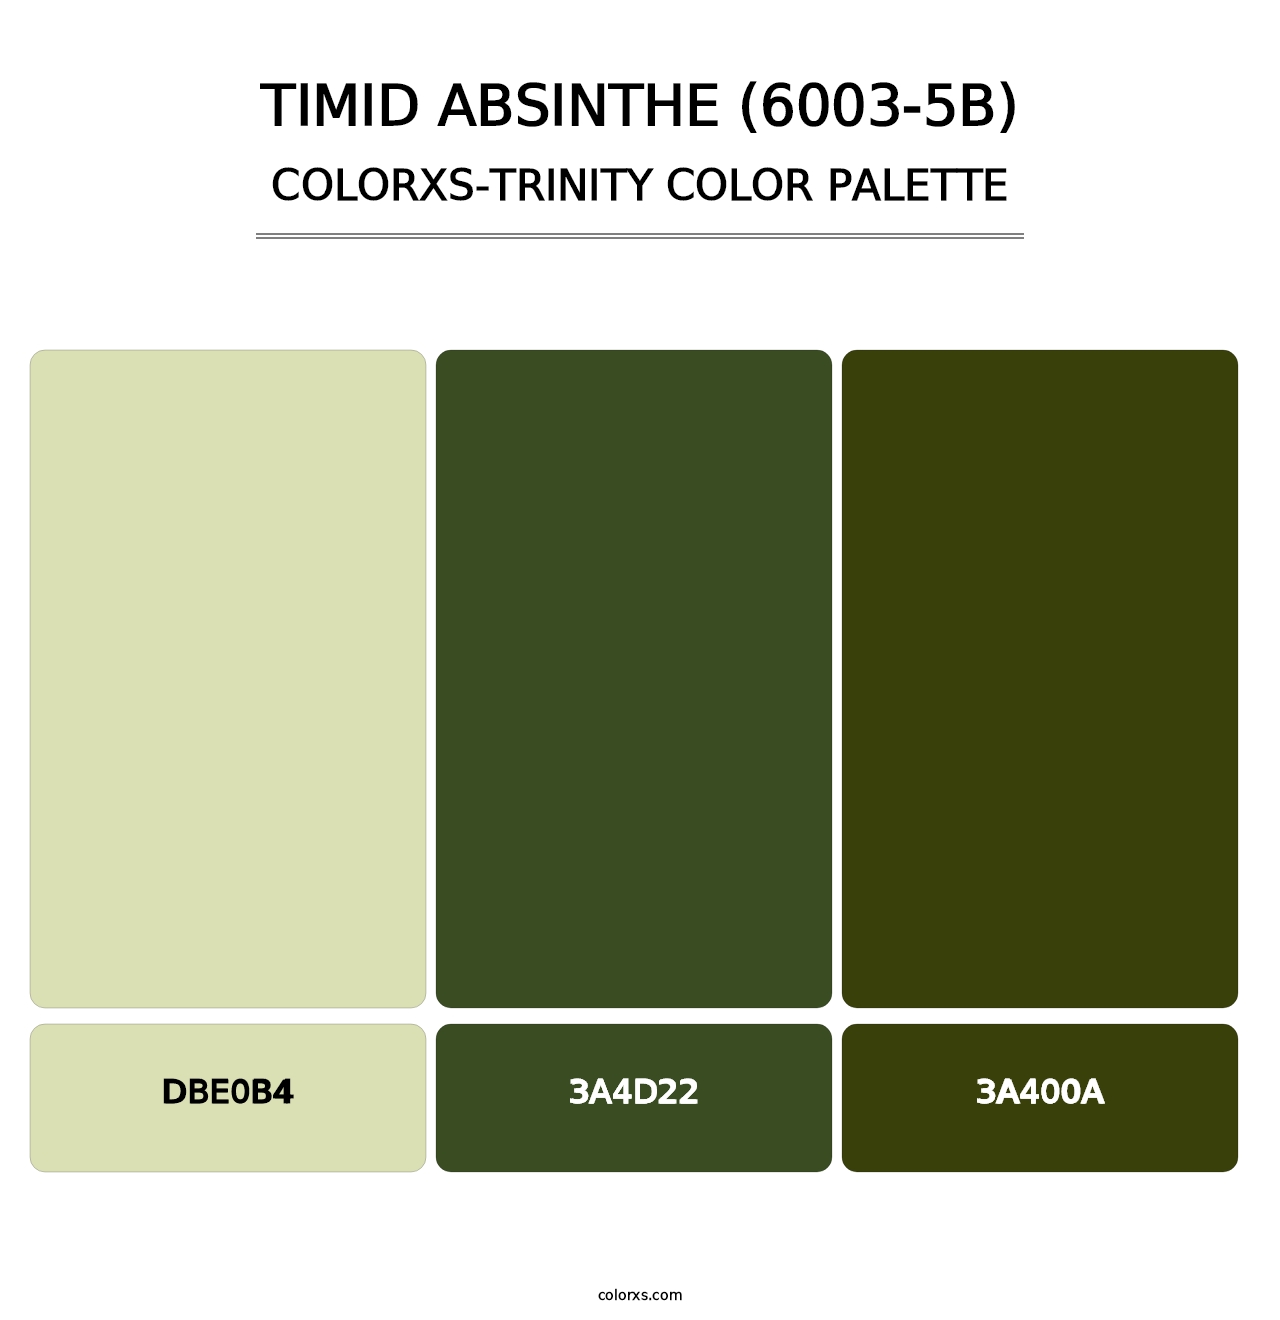 Timid Absinthe (6003-5B) - Colorxs Trinity Palette